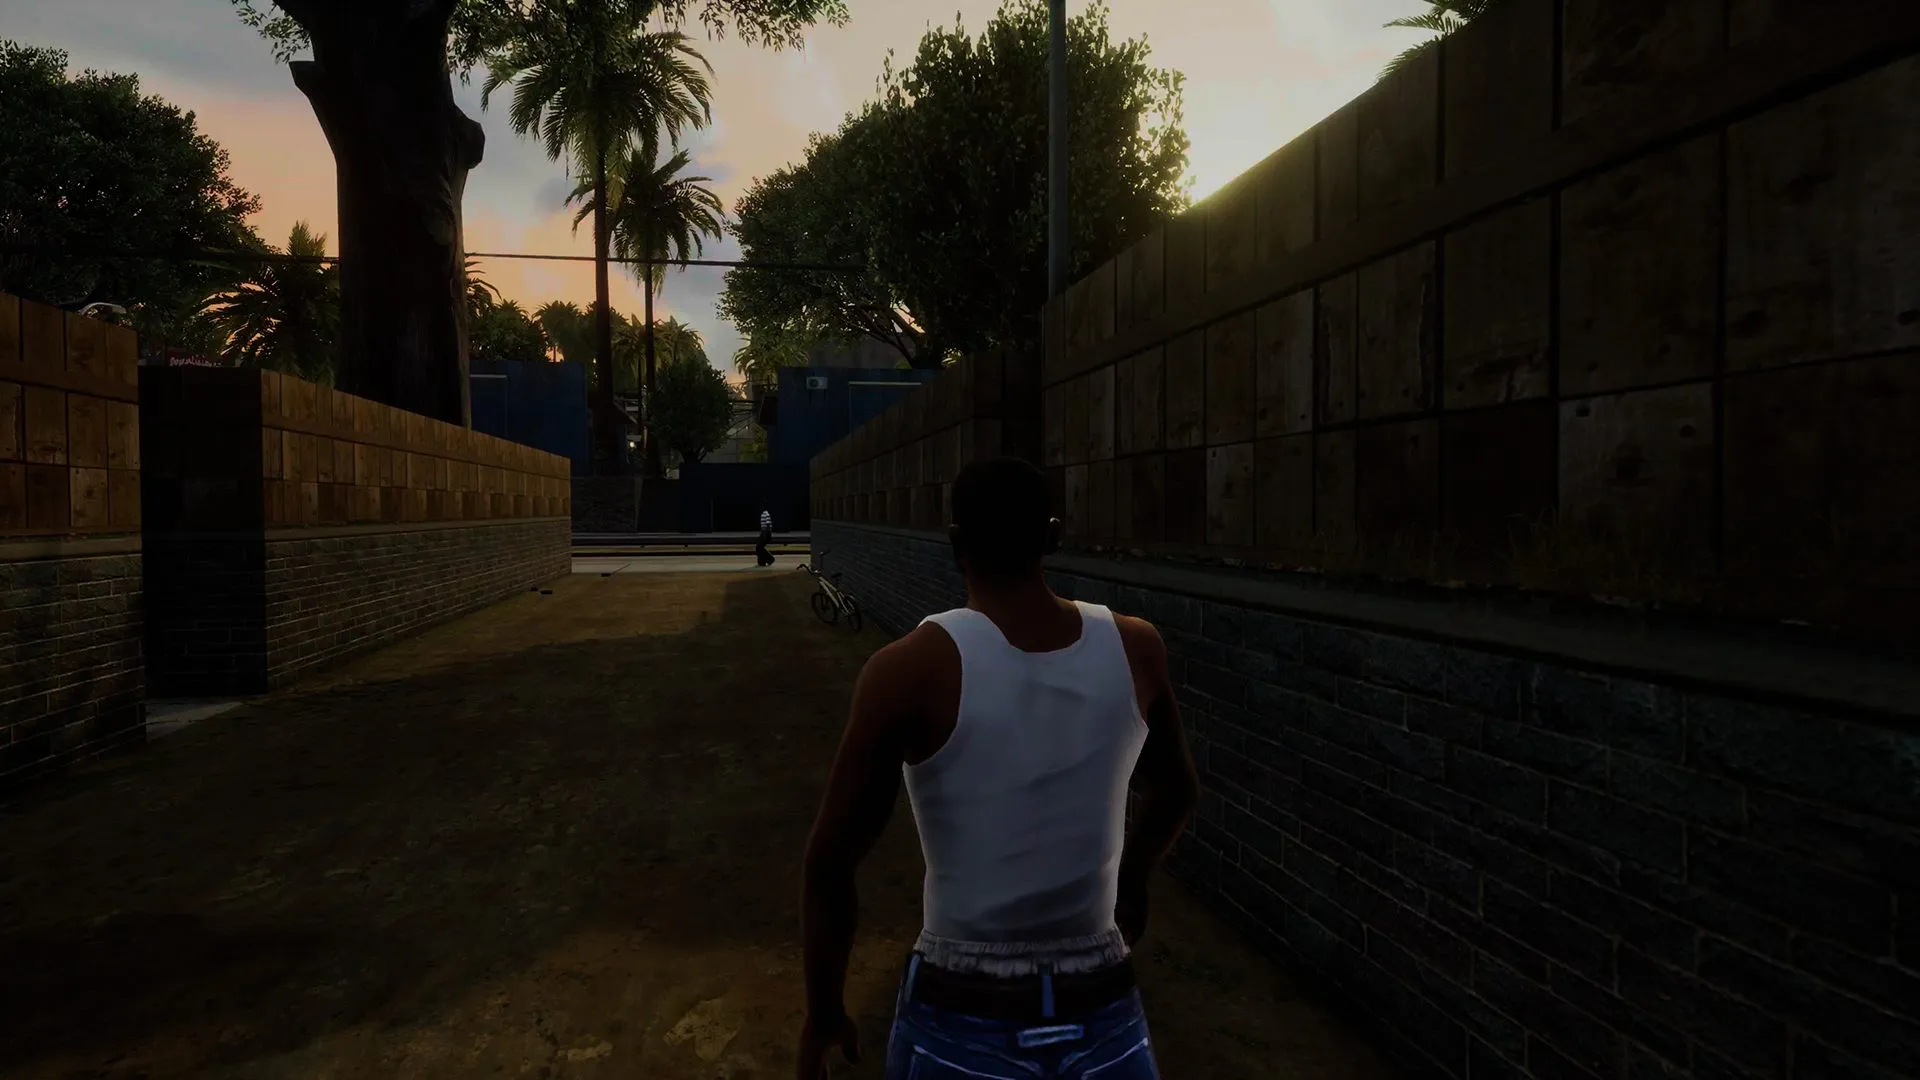 When I'm playing and I get bored in GTA San Andreas